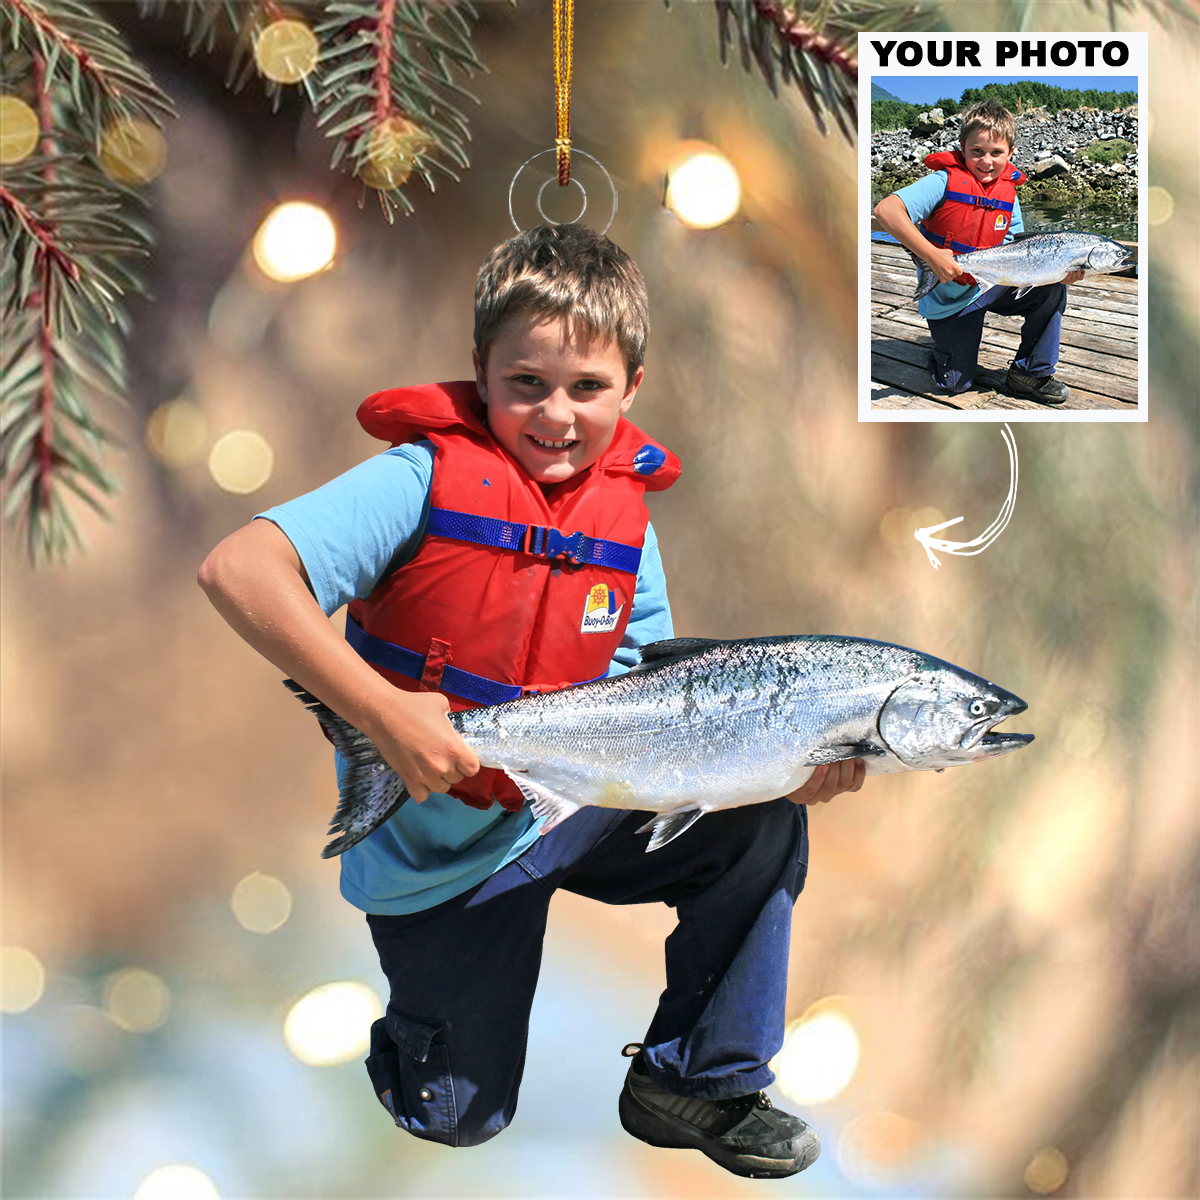 Kid Fishing Ornament - Personalized Custom Photo Mica Ornament - Christmas Gift For Fishing Lovers, Family Members, Kids